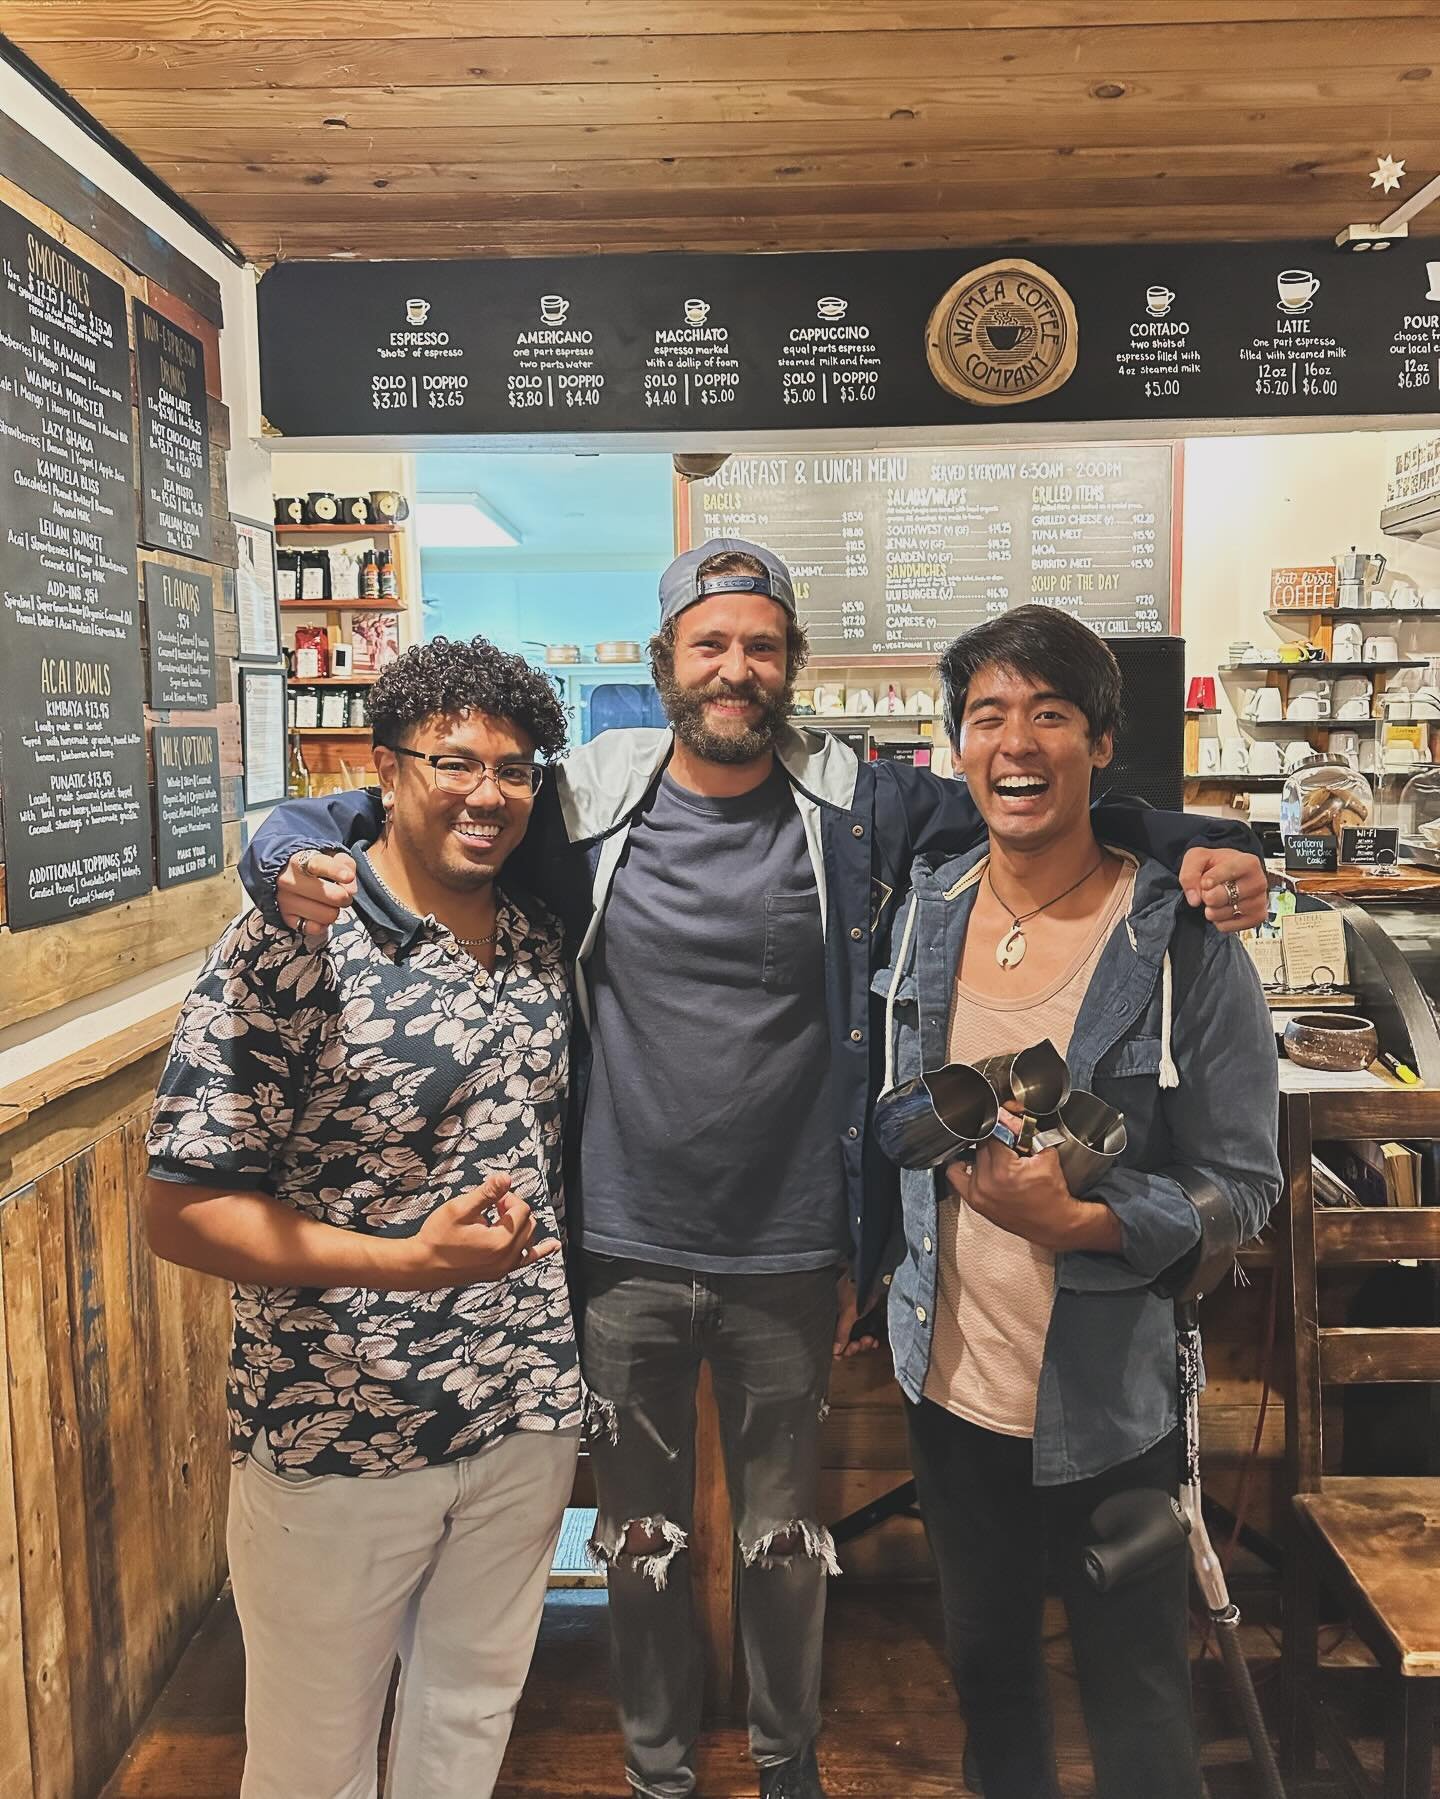 Waimea Coffee Company latteart throw down was such a blast! So proud of our baristas who showed up and poured their very best. Micah ended up placing 5th &amp; Mark took 4th! Mahalo to @waimeacoffeeco for putting together a fun event to bring barista